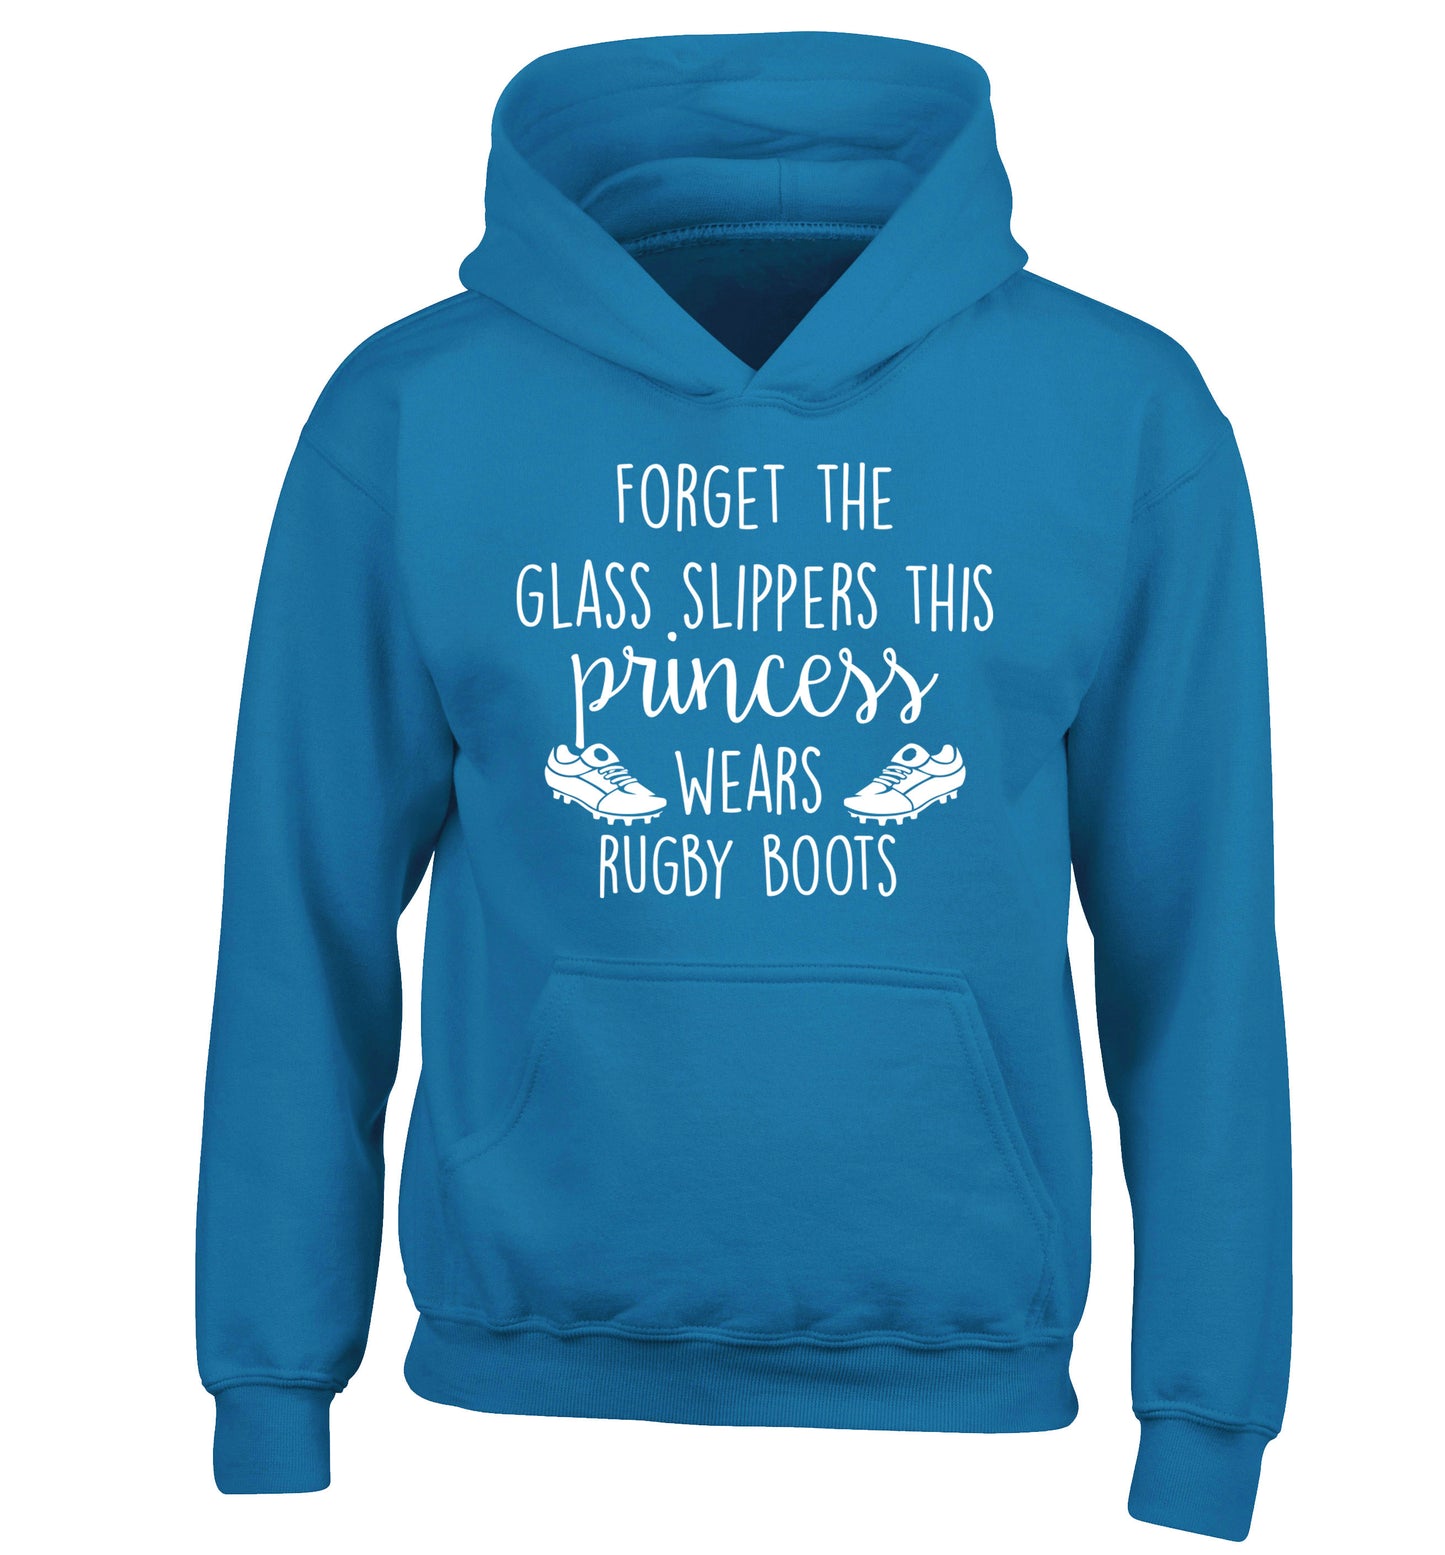 Forget the glass slippers this princess wears rugby boots children's blue hoodie 12-14 Years